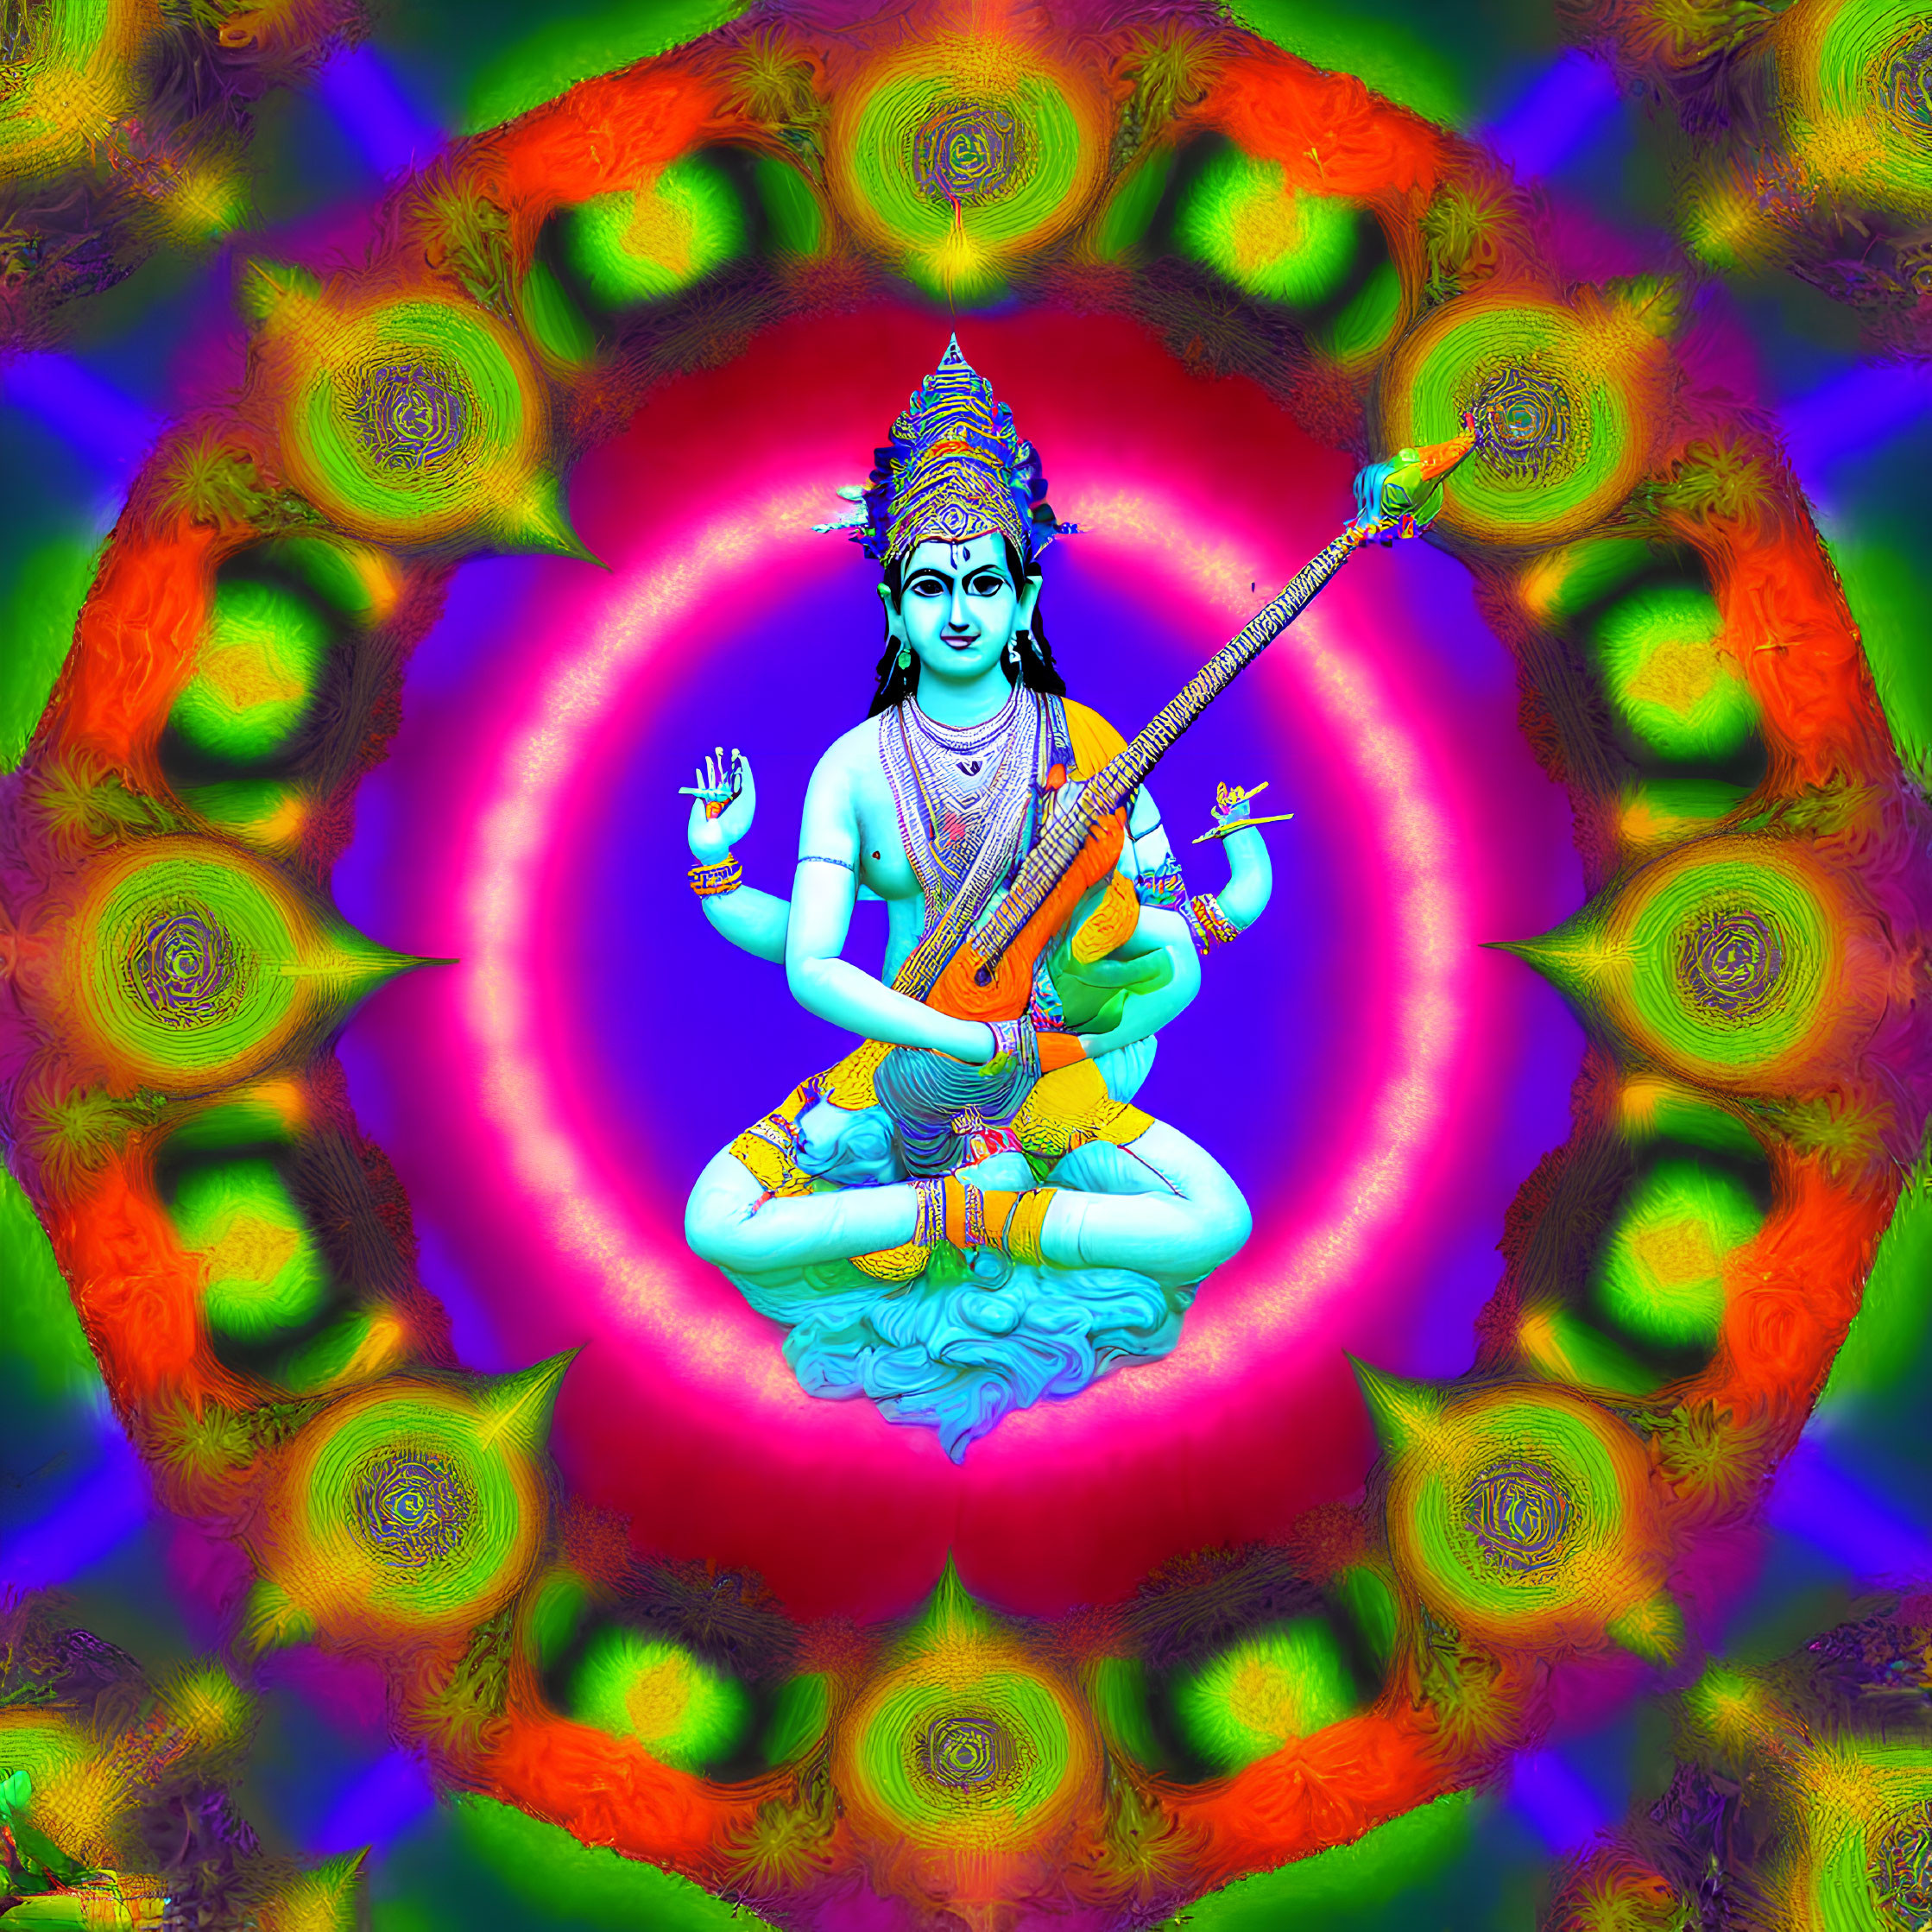 Four-armed deity seated on a cloud with colorful psychedelic background